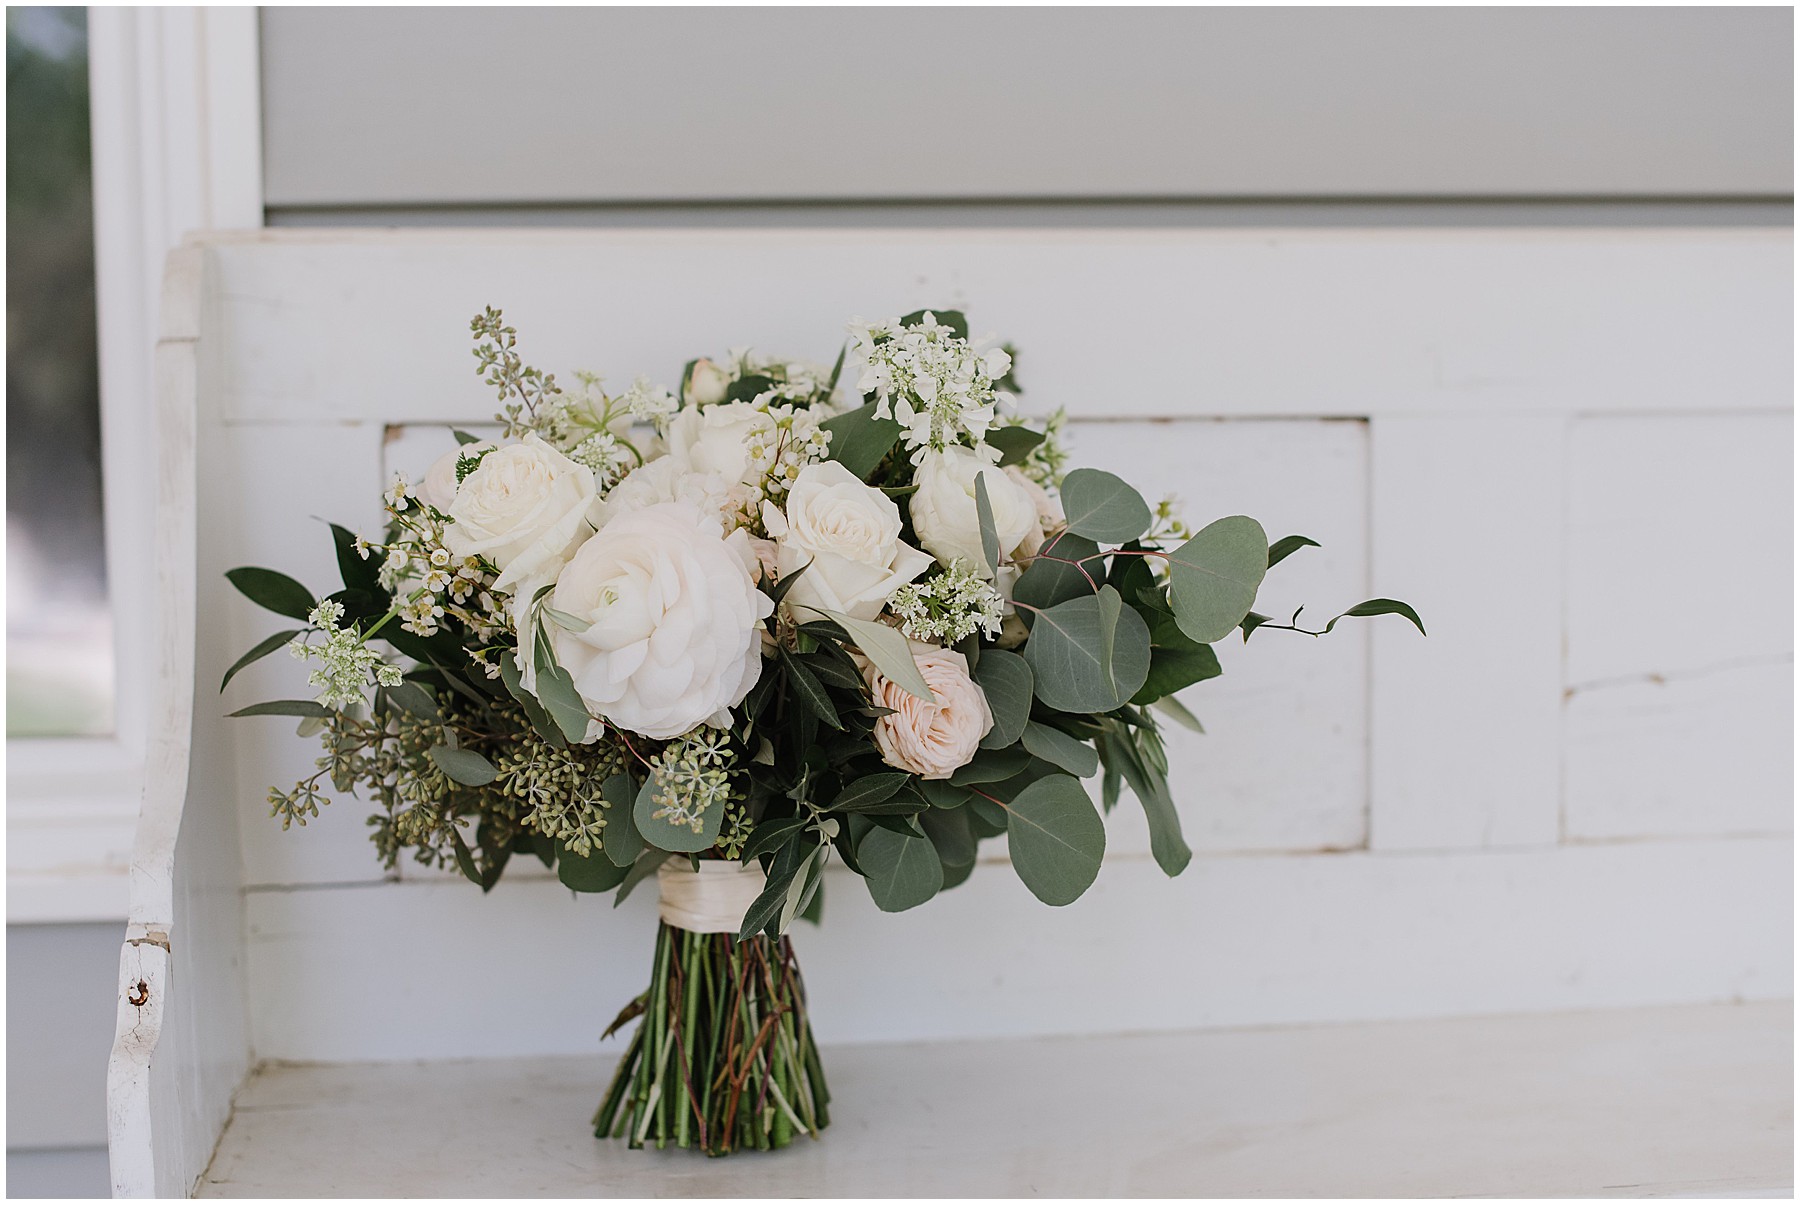 The Grace Maralyn Estate & Gardens Wedding with Whites, Neutrals, & Greenery